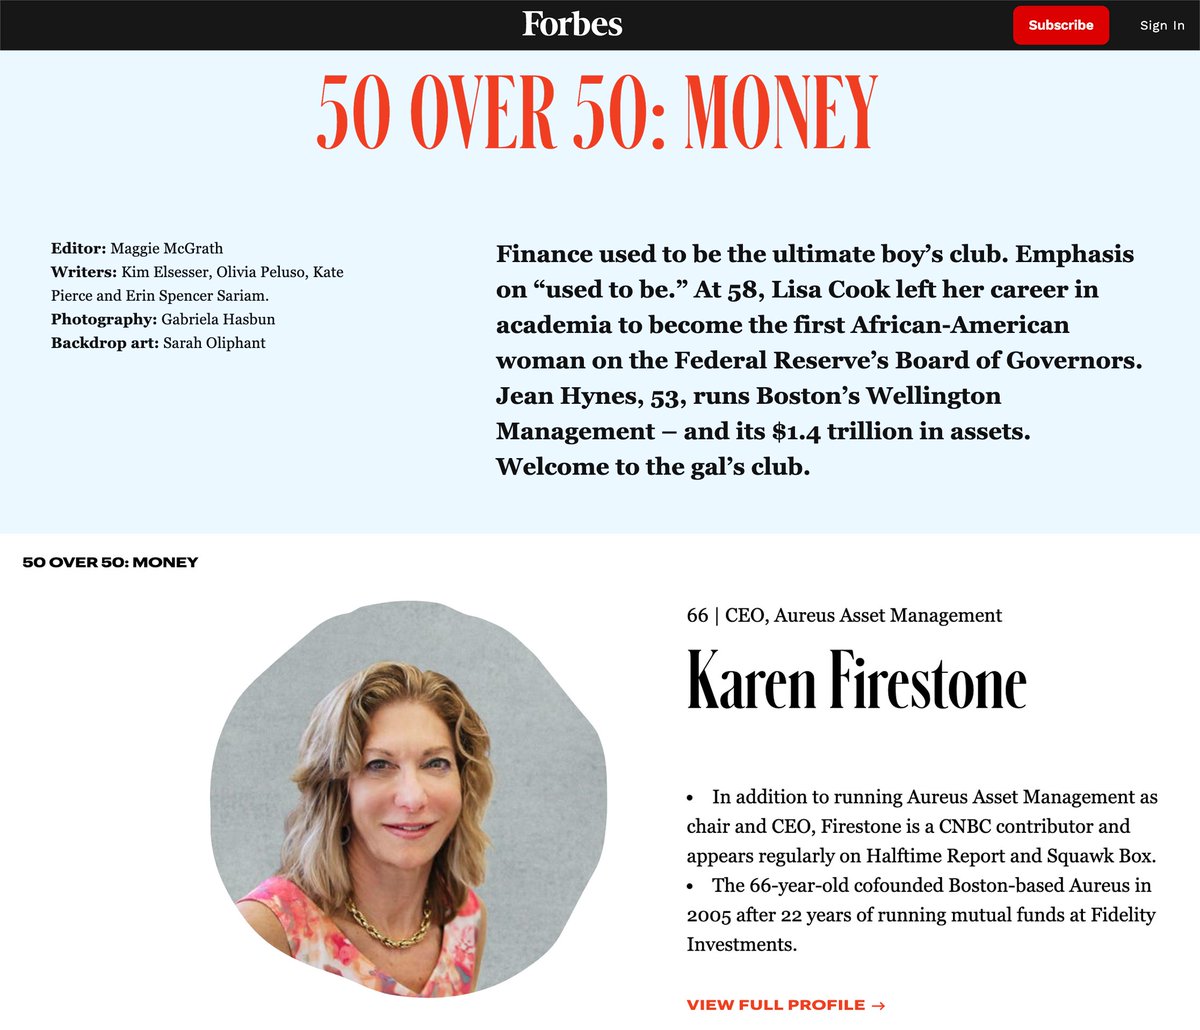 Karen Firestone On Twitter What An Exciting Piece Honored To Be Included In This Forbes 